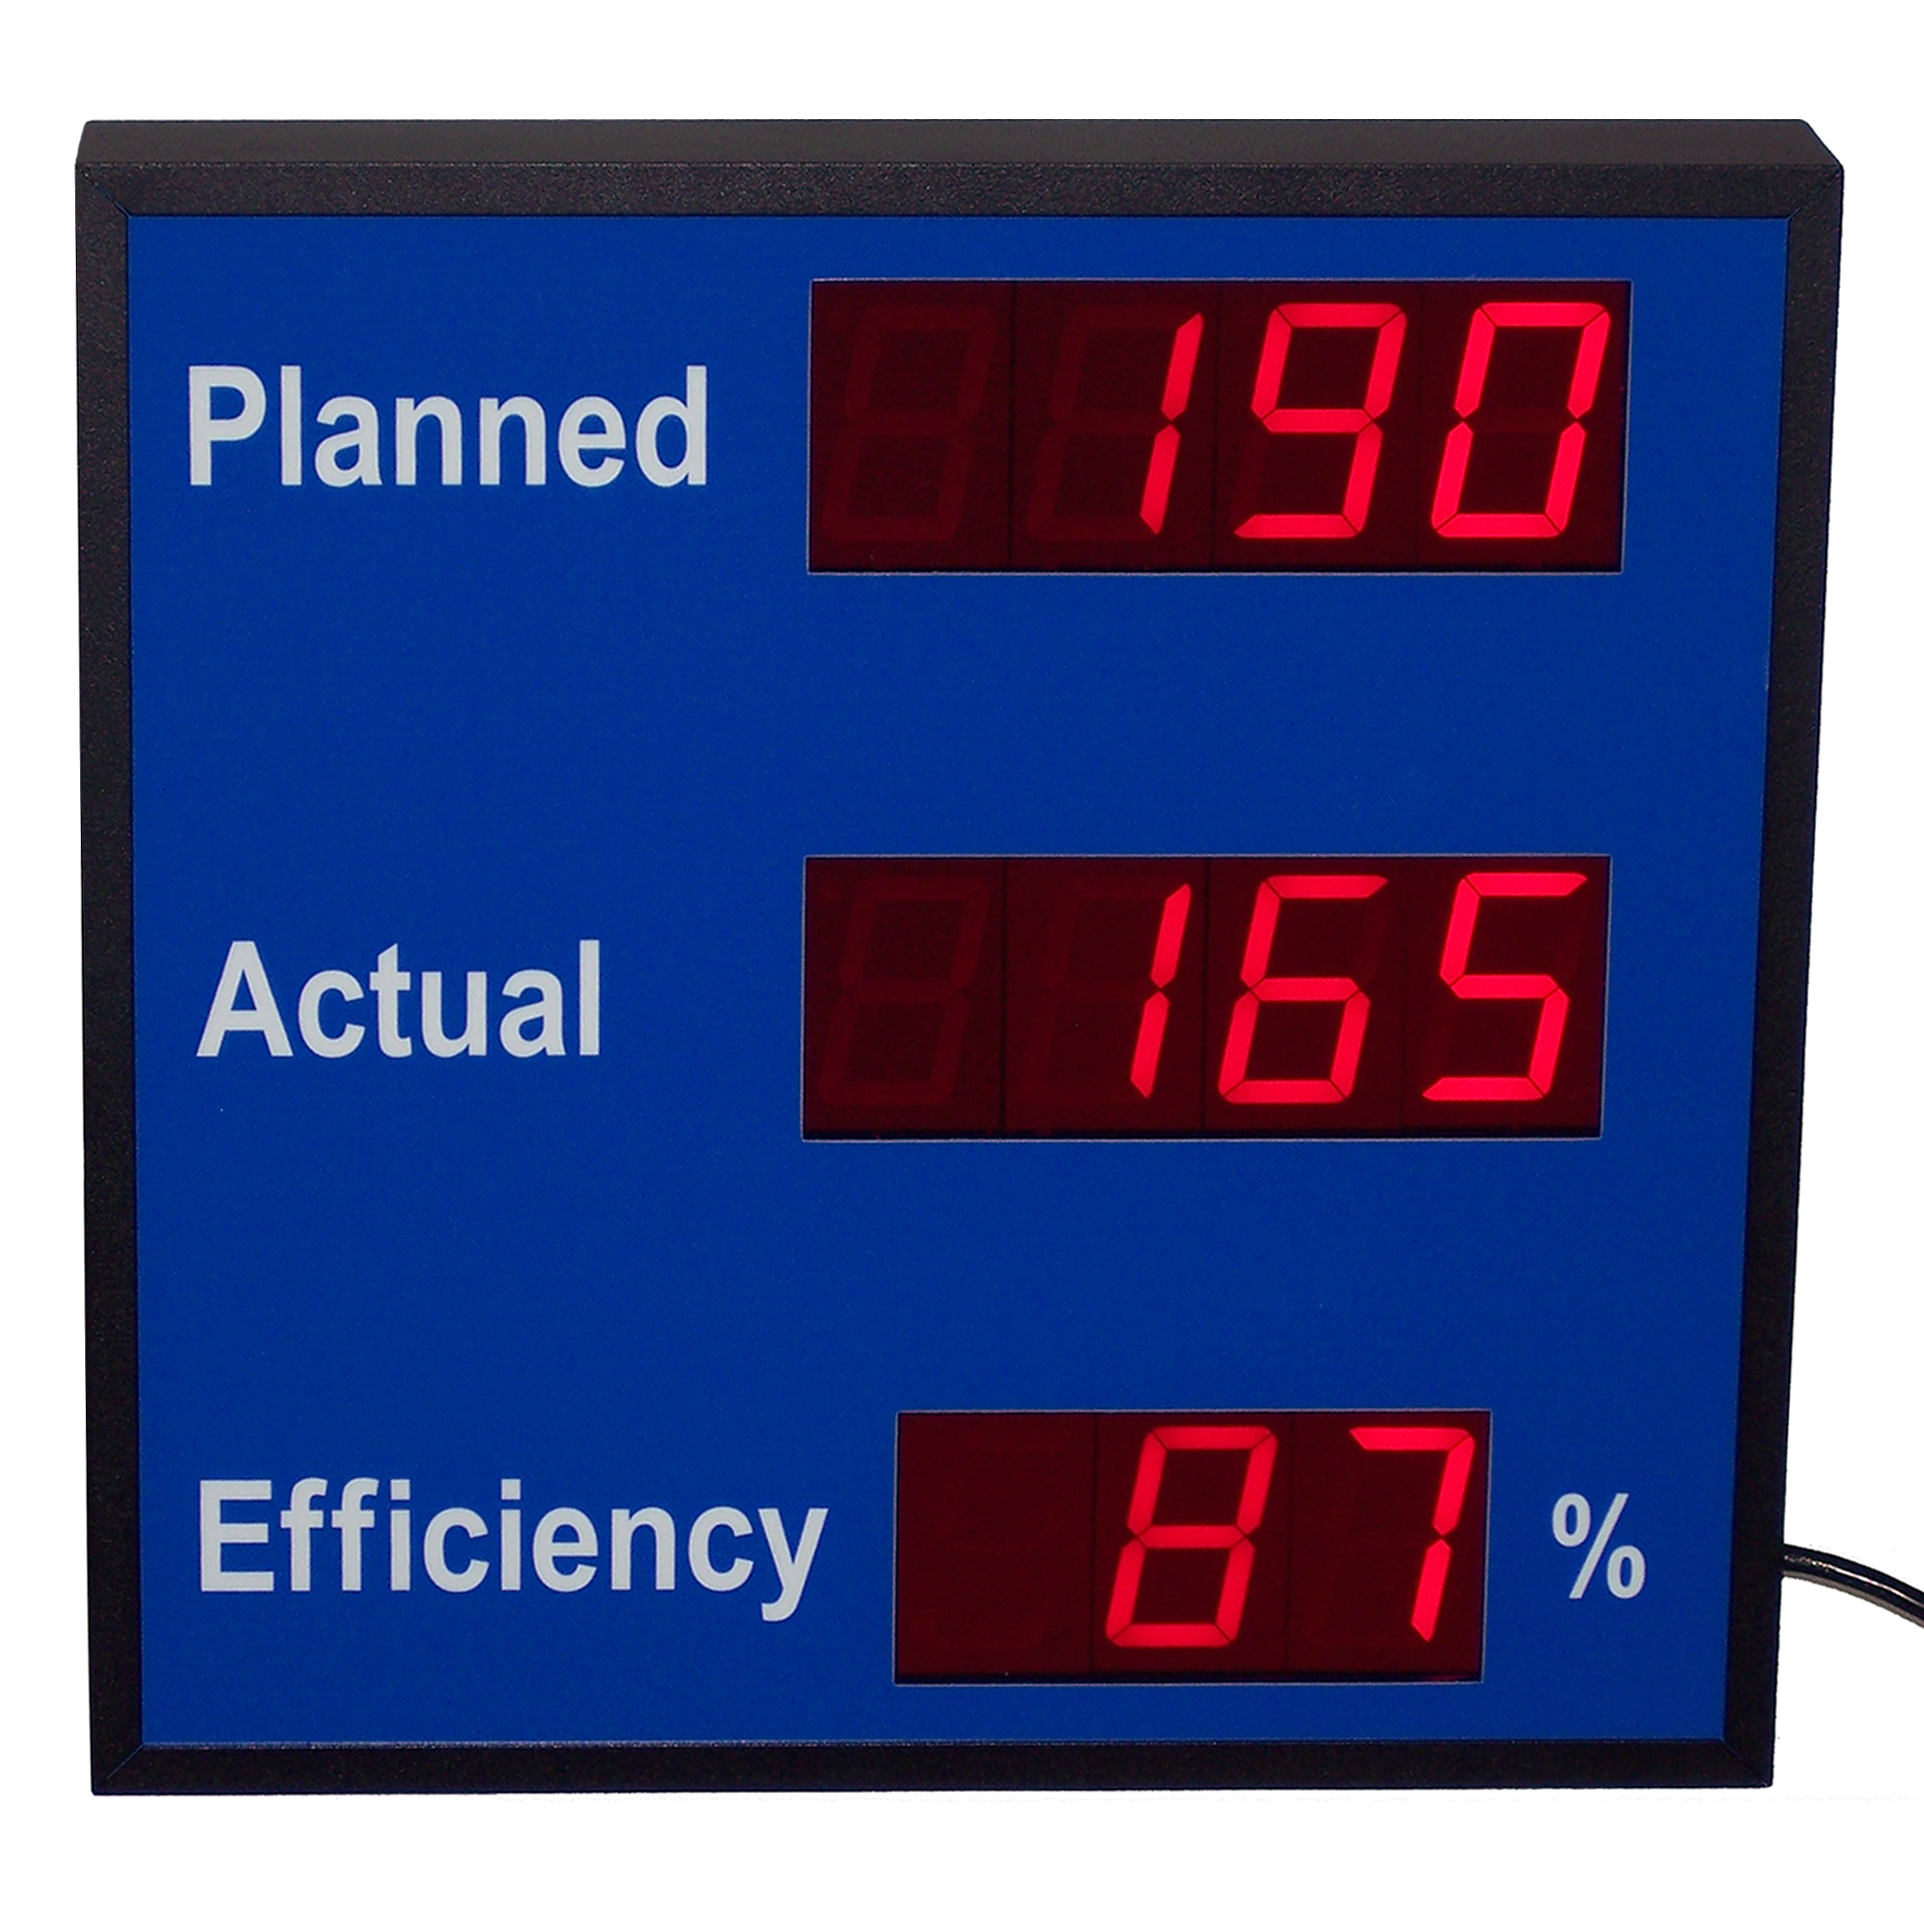 (DC-25C-2-EFF) 2.3 Inch LED Digital Production Efficiency Counter that accepts: PLC, Relay, Switch and Sensor Input Controls for Actual Count and Environmentally Sealed Push-Buttons for Setting the Planned Count